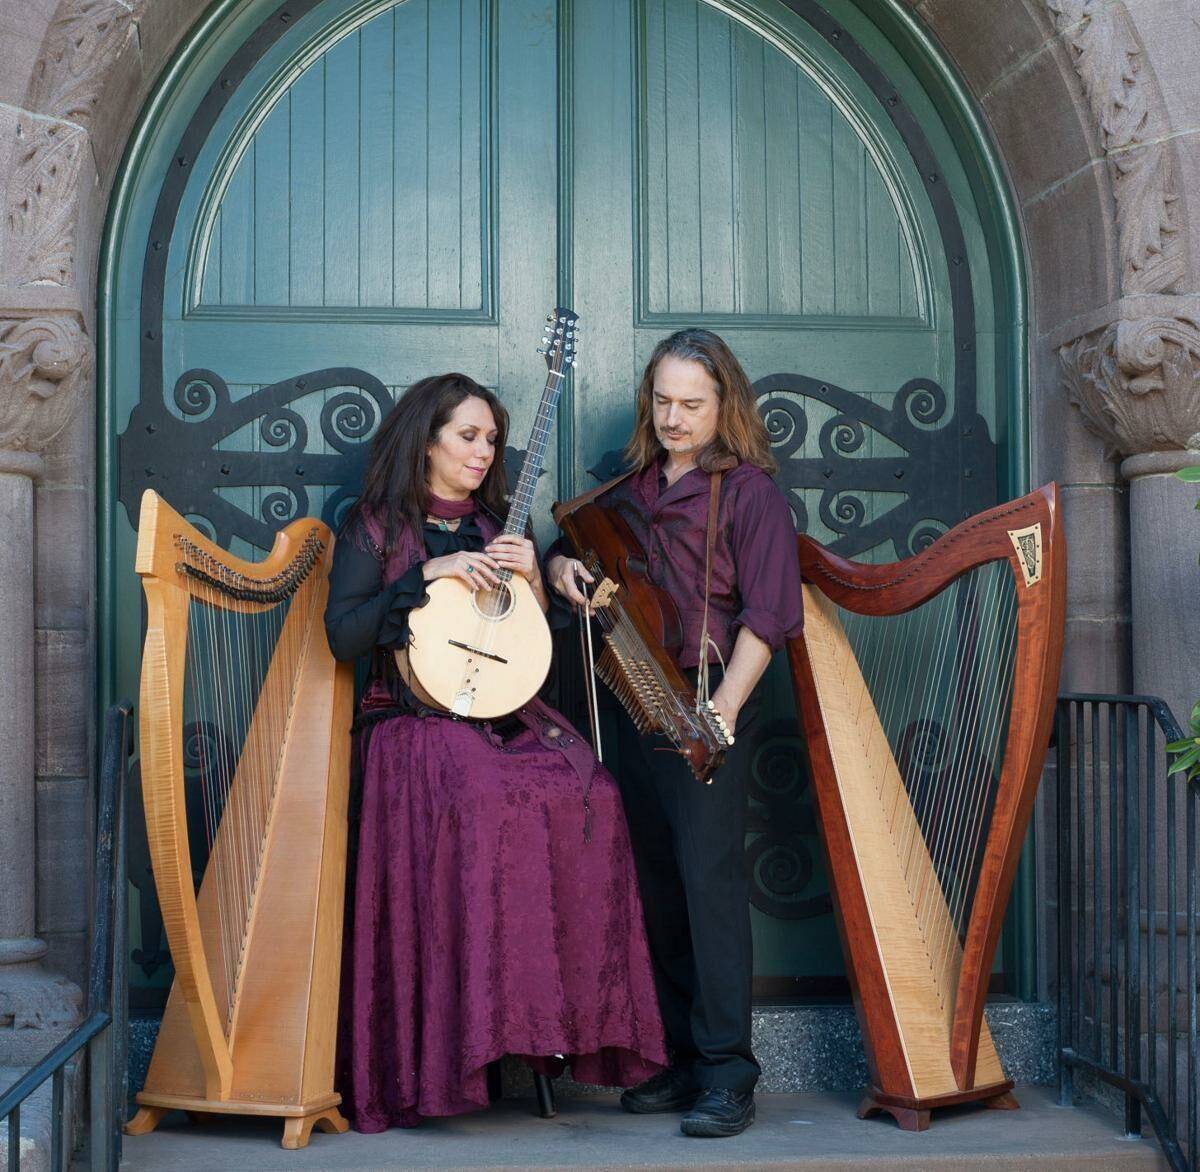 Photo courtesy of North Olympic Library System
Lisa Lynne and Aryeh Frankfurter offer two concerts, one in Port Angeles on Oct. 10 and another in Sequim on Oct. 11, titled “Celtic Harps, Rare Instruments and Wondrous Stories.”